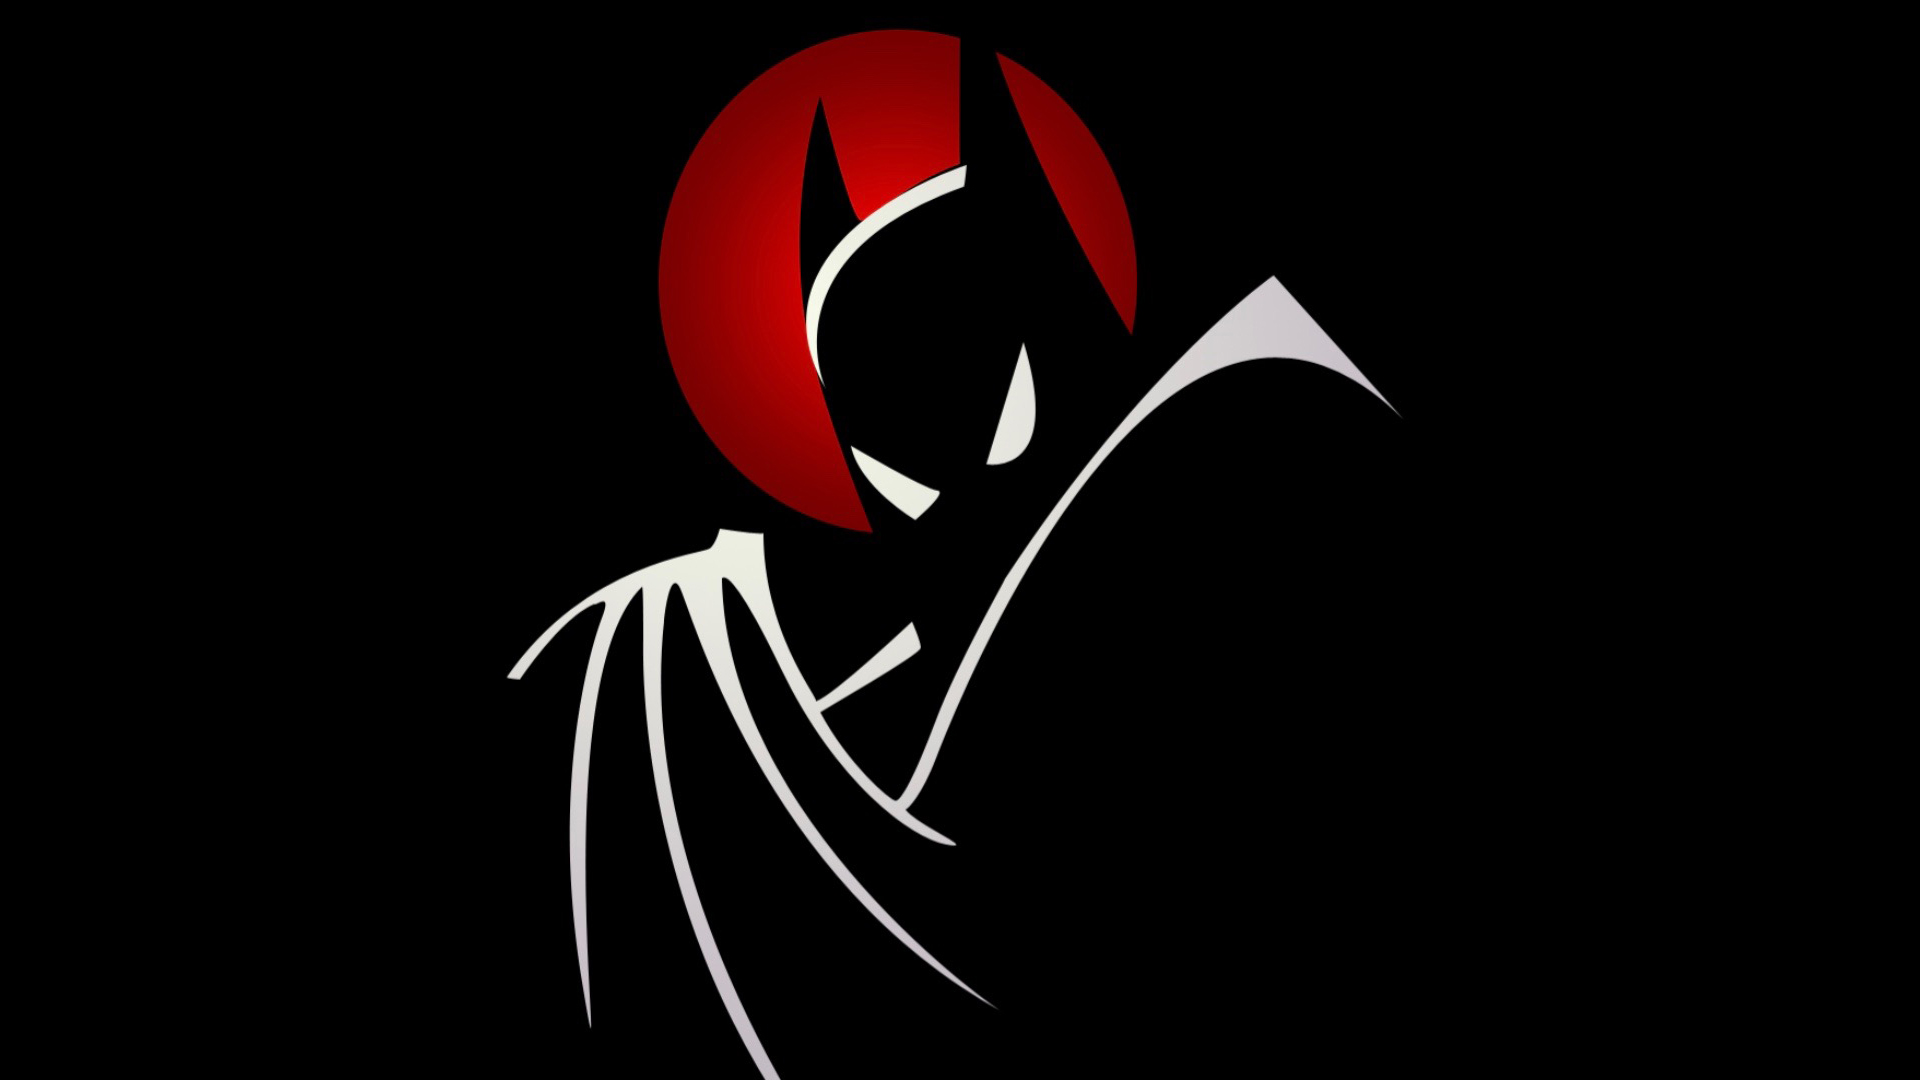 TV Show Batman: The Animated Series HD Wallpaper | Background Image